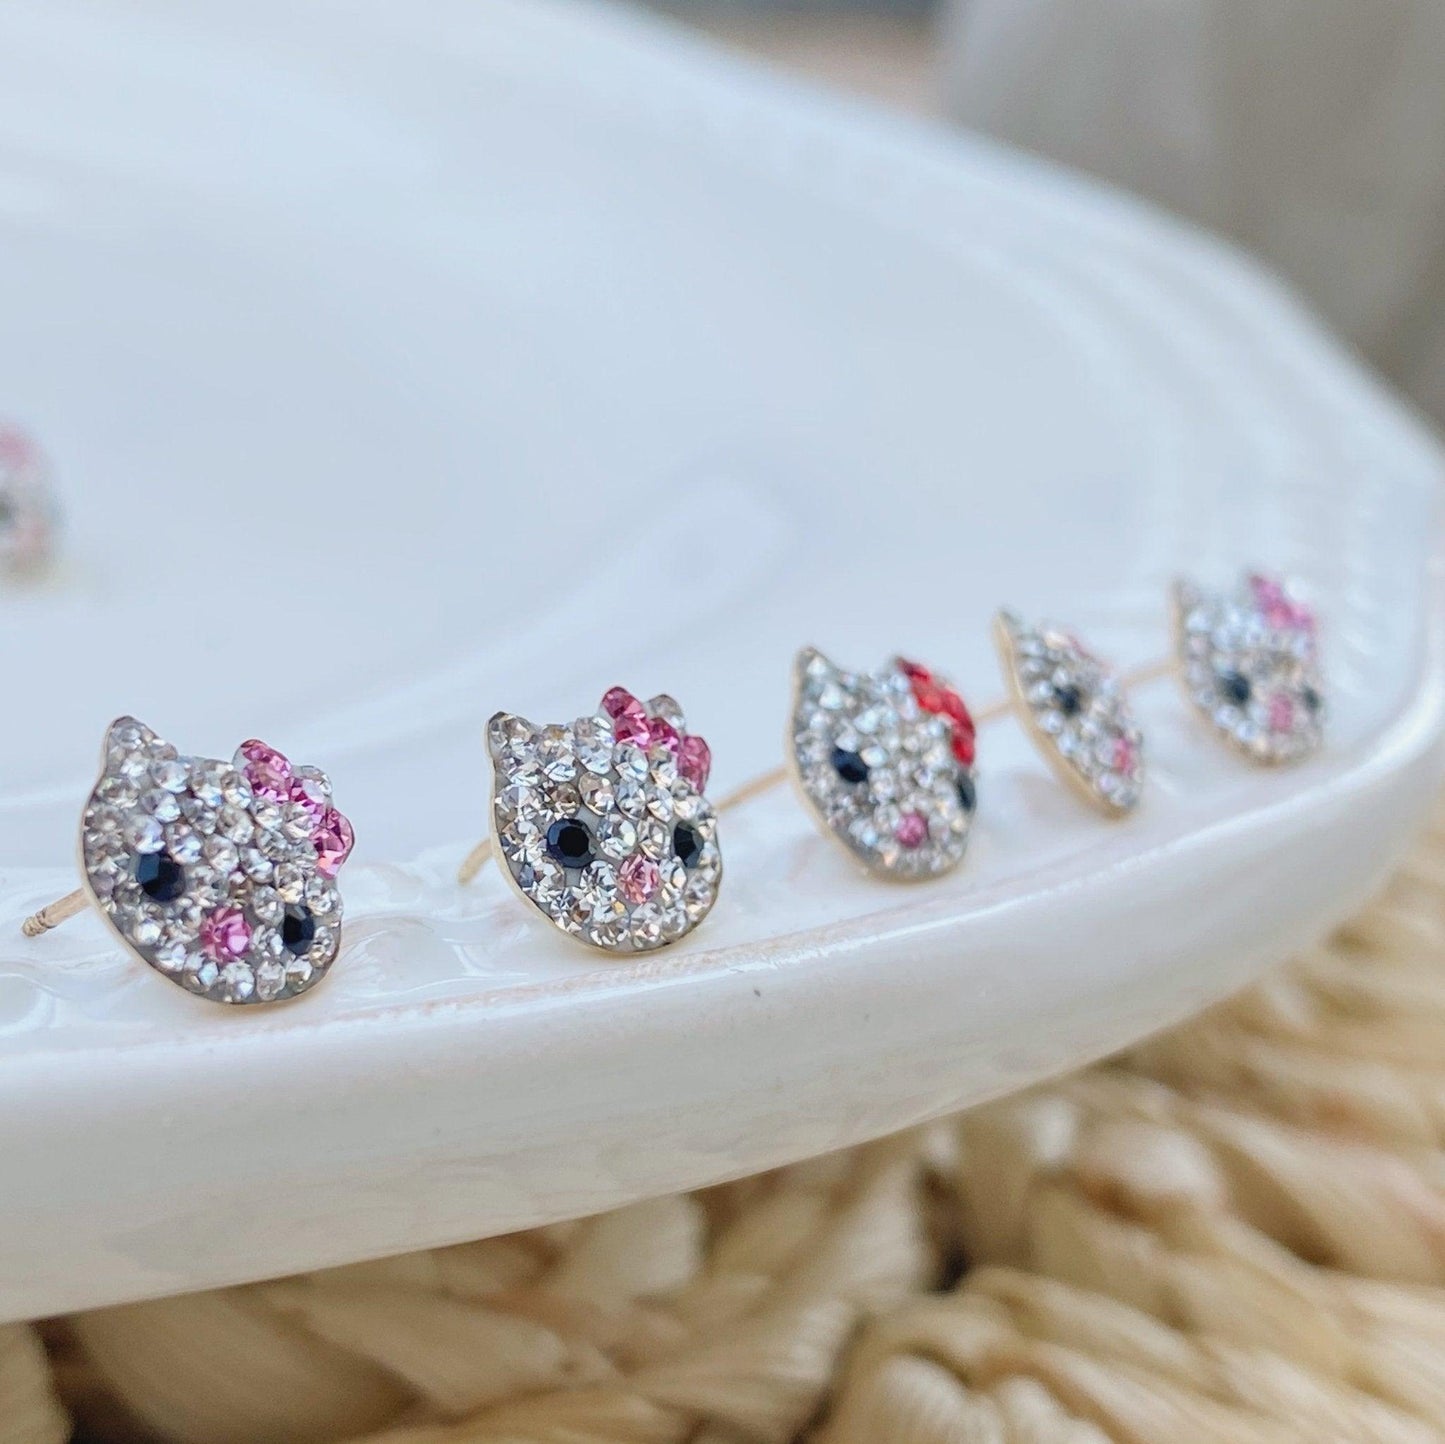 Hello Kitty inspired gold earrings are perfect for every occasion and will add a touch of style to any ears. These adorable round stud earrings are not only a fun statement but they also look great! The screw back closure makes them safe for use by young girls who like to wear earrings.